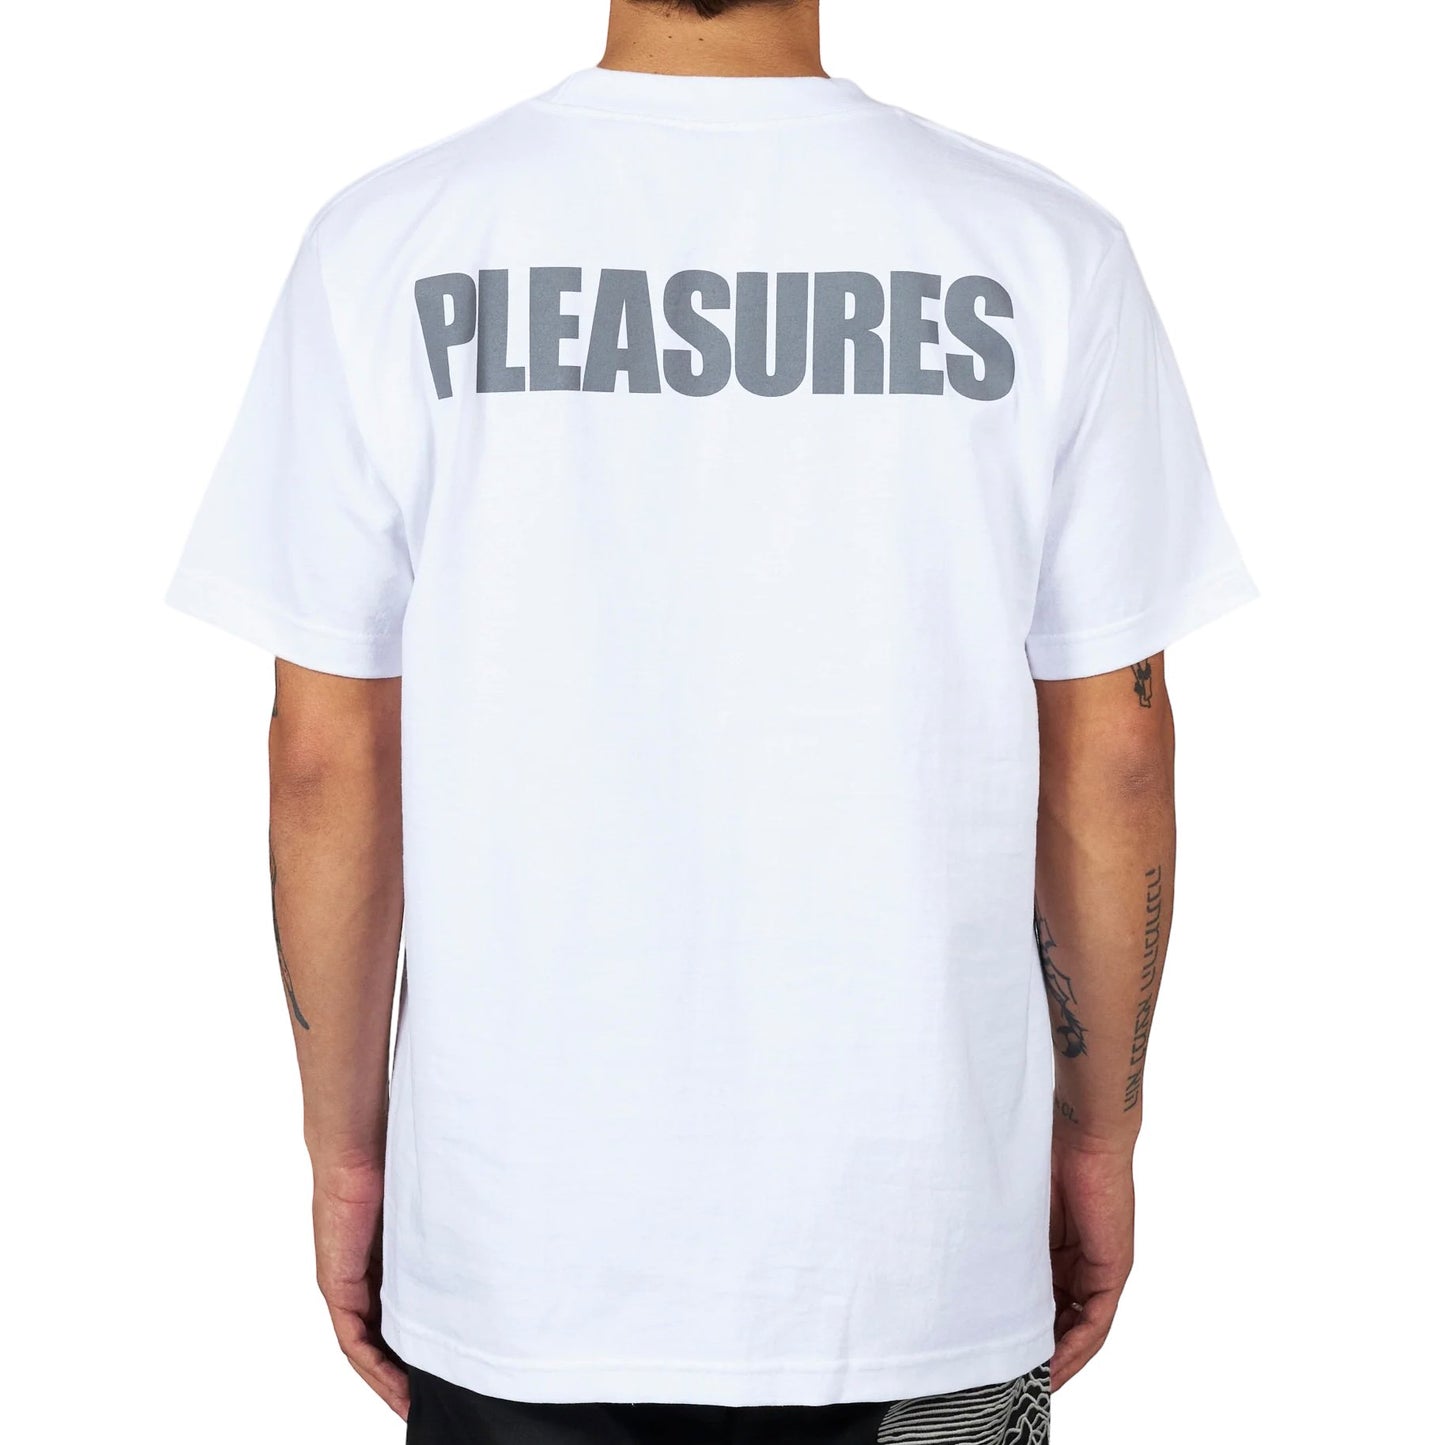 Man wearing a PLEASURES BROKEN IN T-SHIRT WHT with the word "pleasures" screen printed on the back, featuring a Joy Division collaboration.